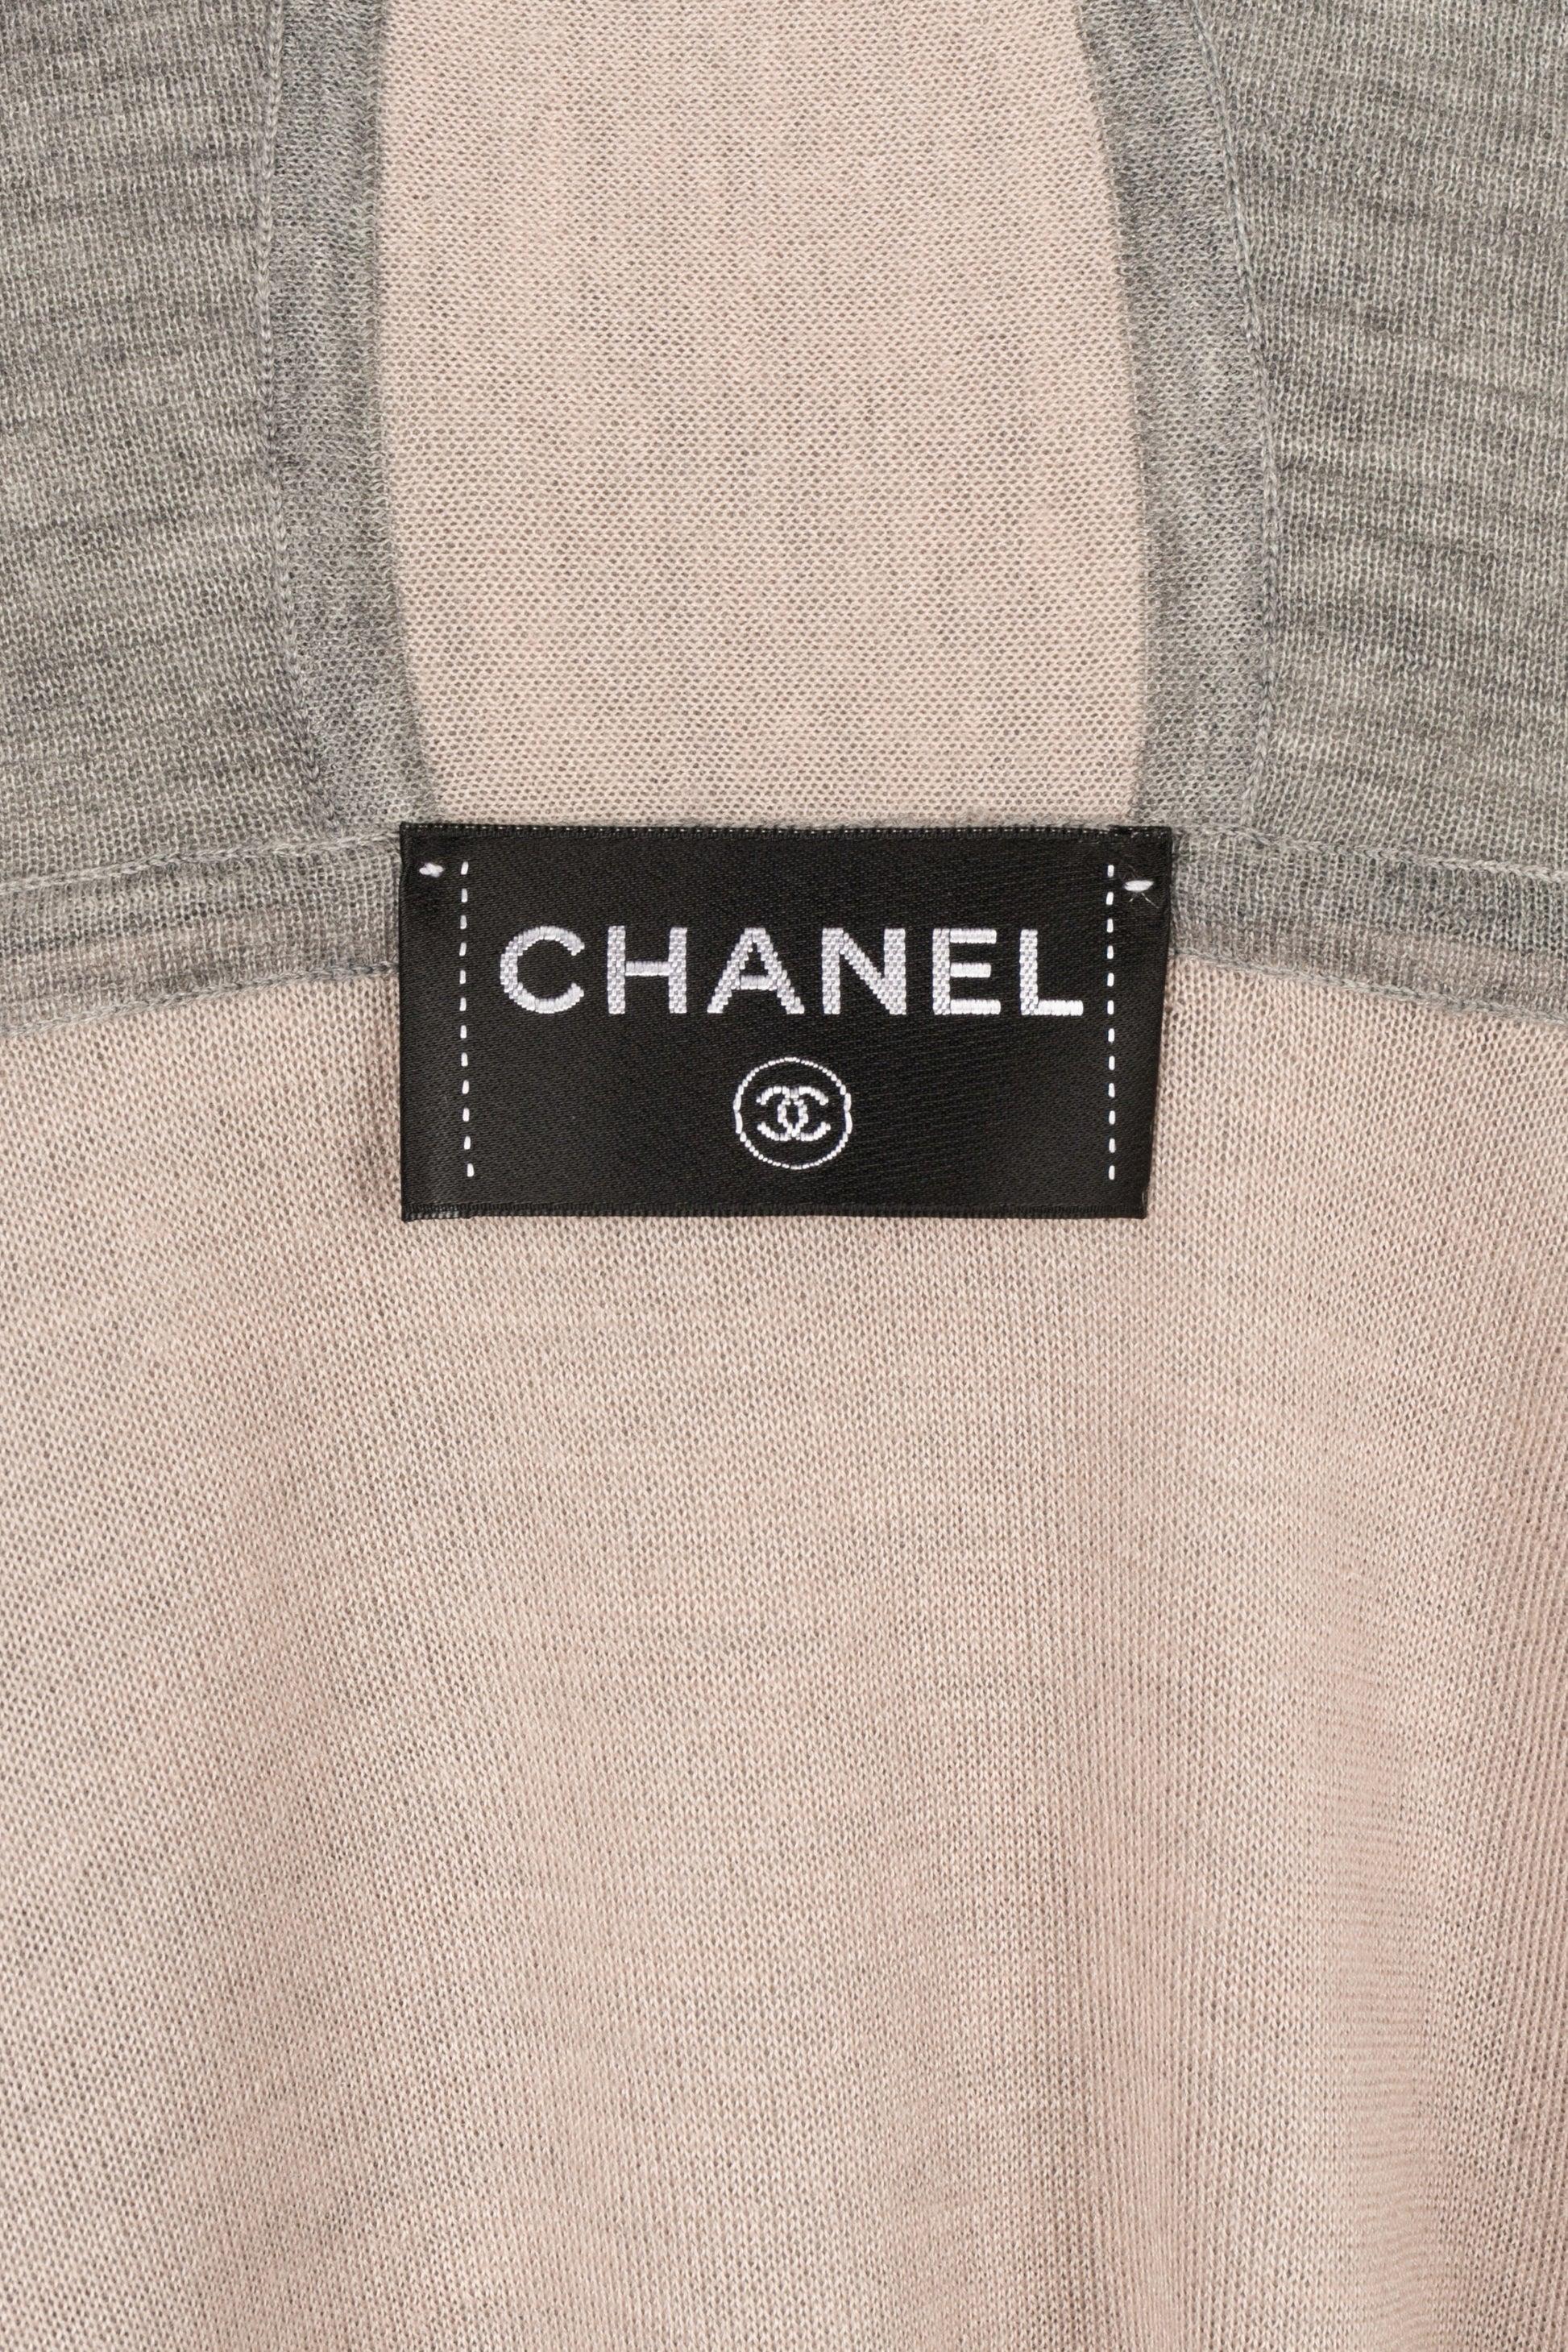 Chanel Grey Cashmere Hooded Pullover Dress For Sale 4